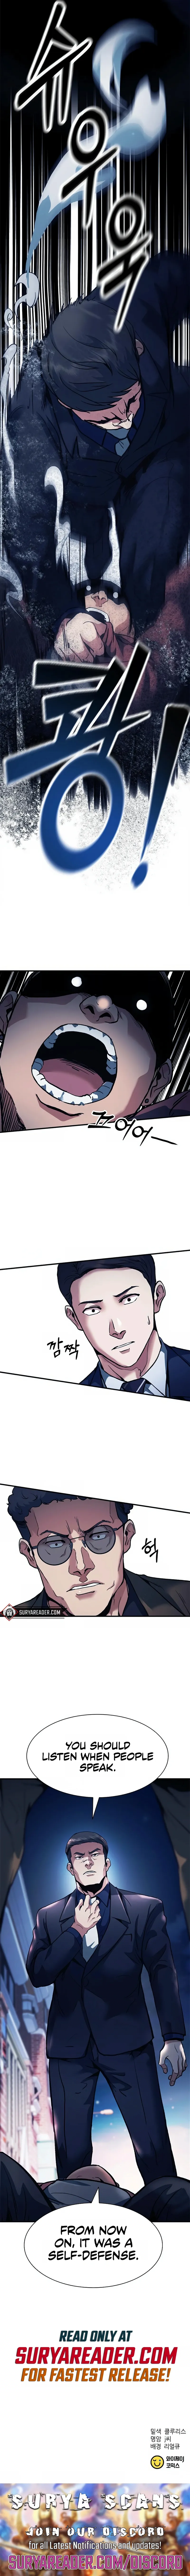 Chairman Kang: The Newcomer Chapter 16 page 16